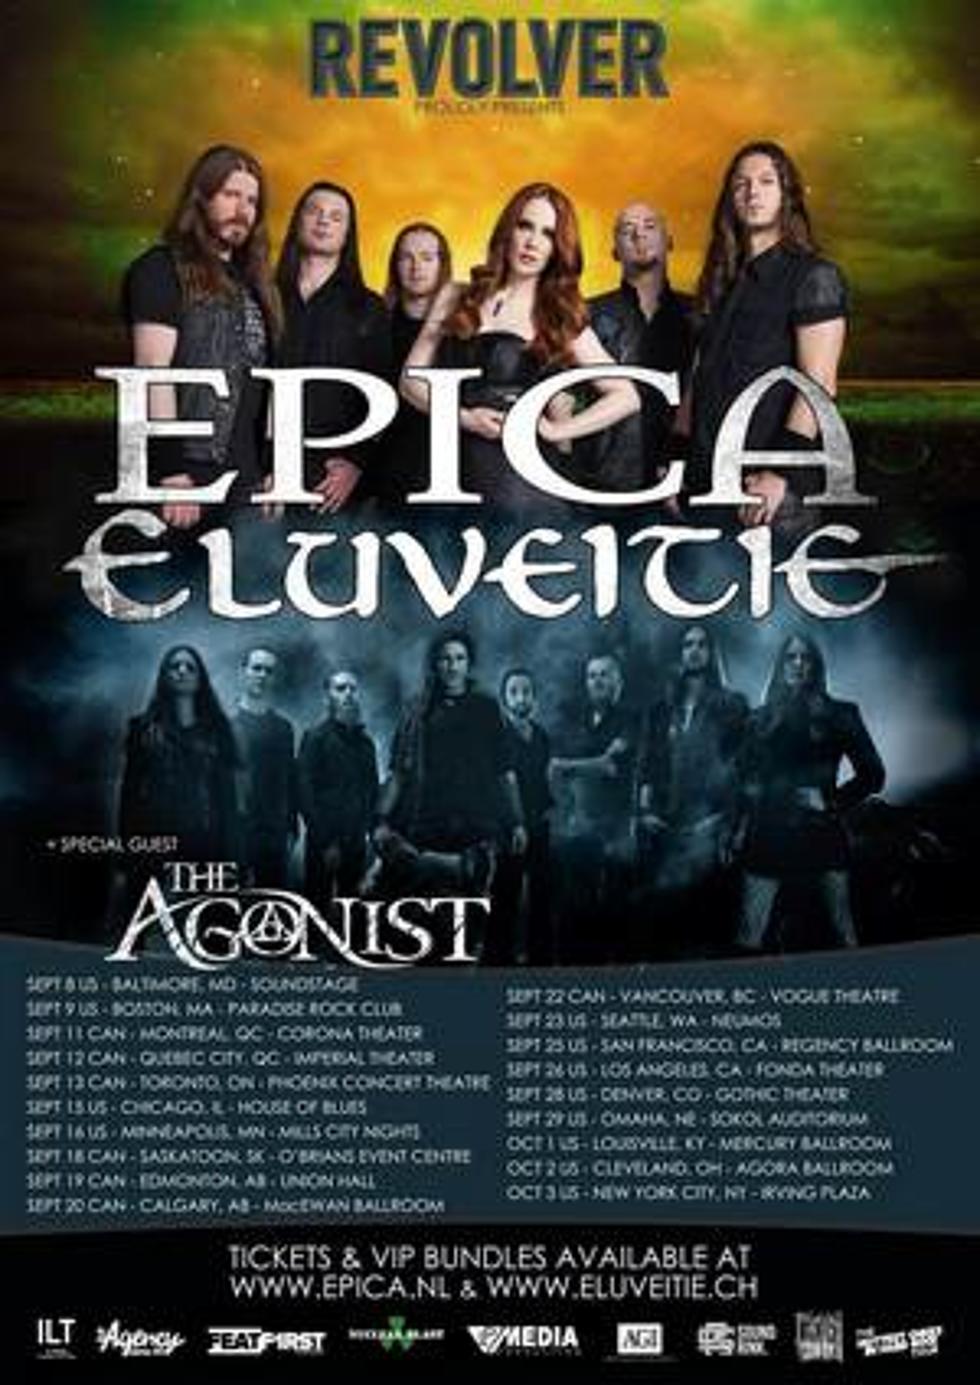 Epica + Eluveitie Team Up for 2015 North American Tour